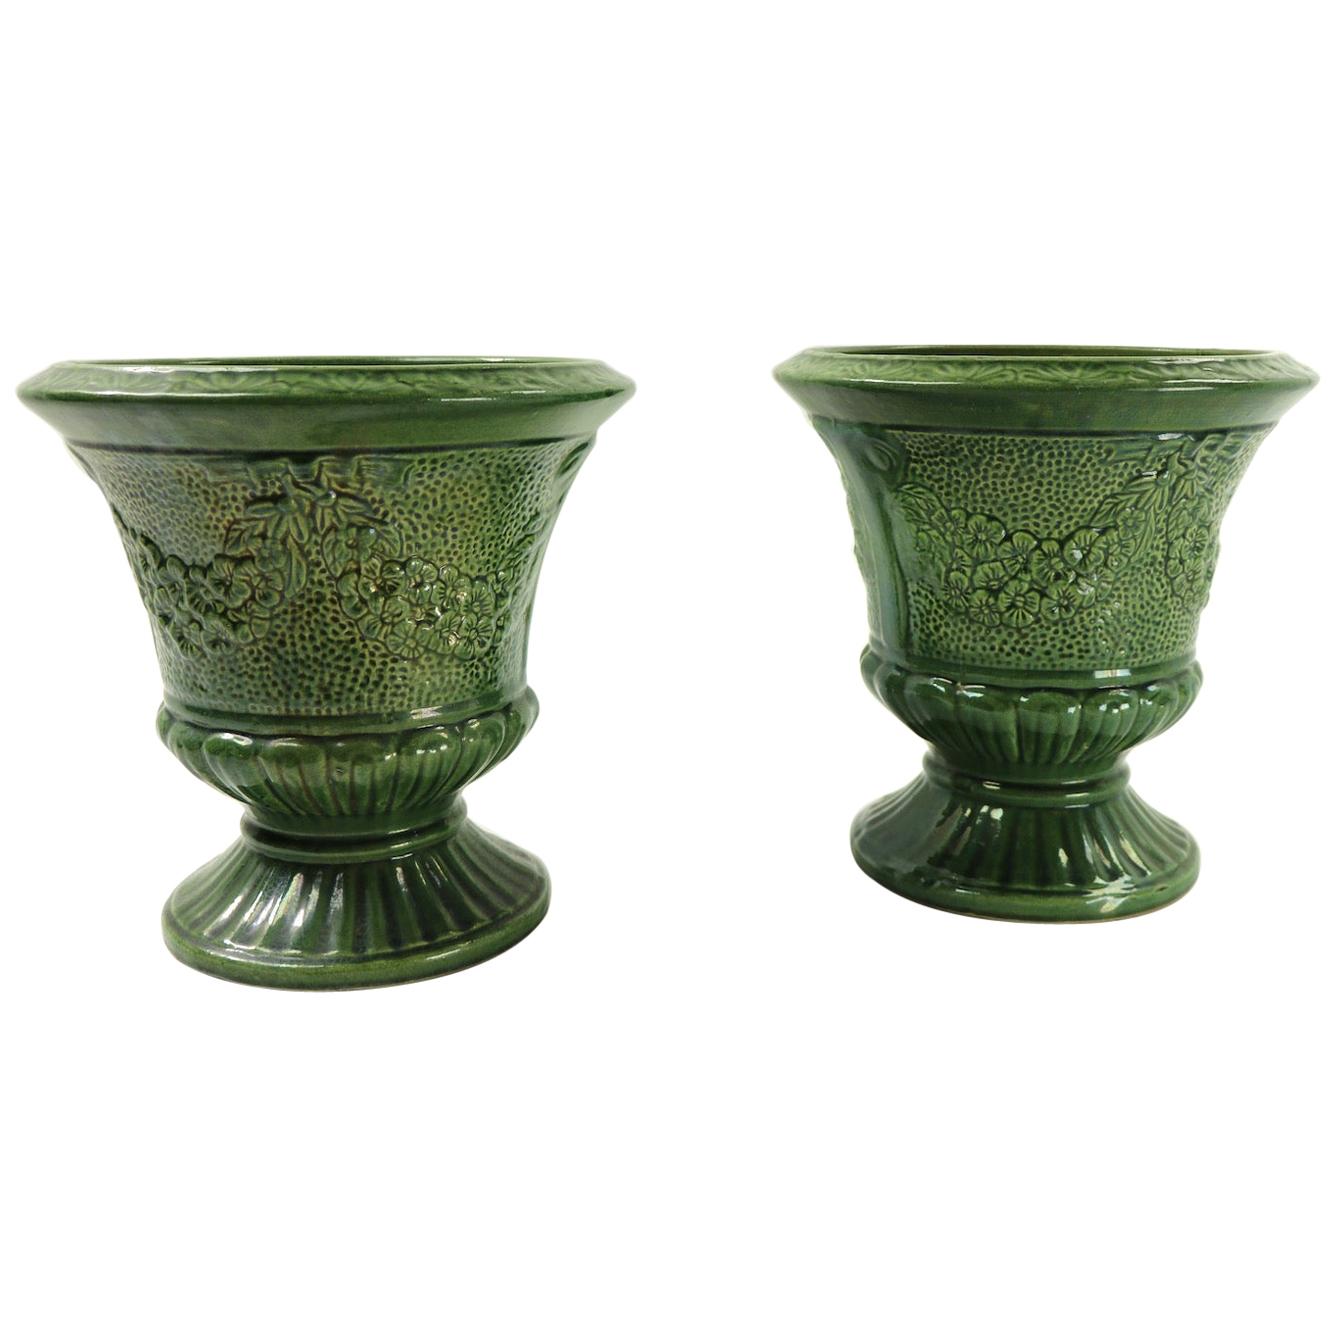 Pair of Pottery Jardinières Planters, Urns, Possibly Zanesville at 1stDibs